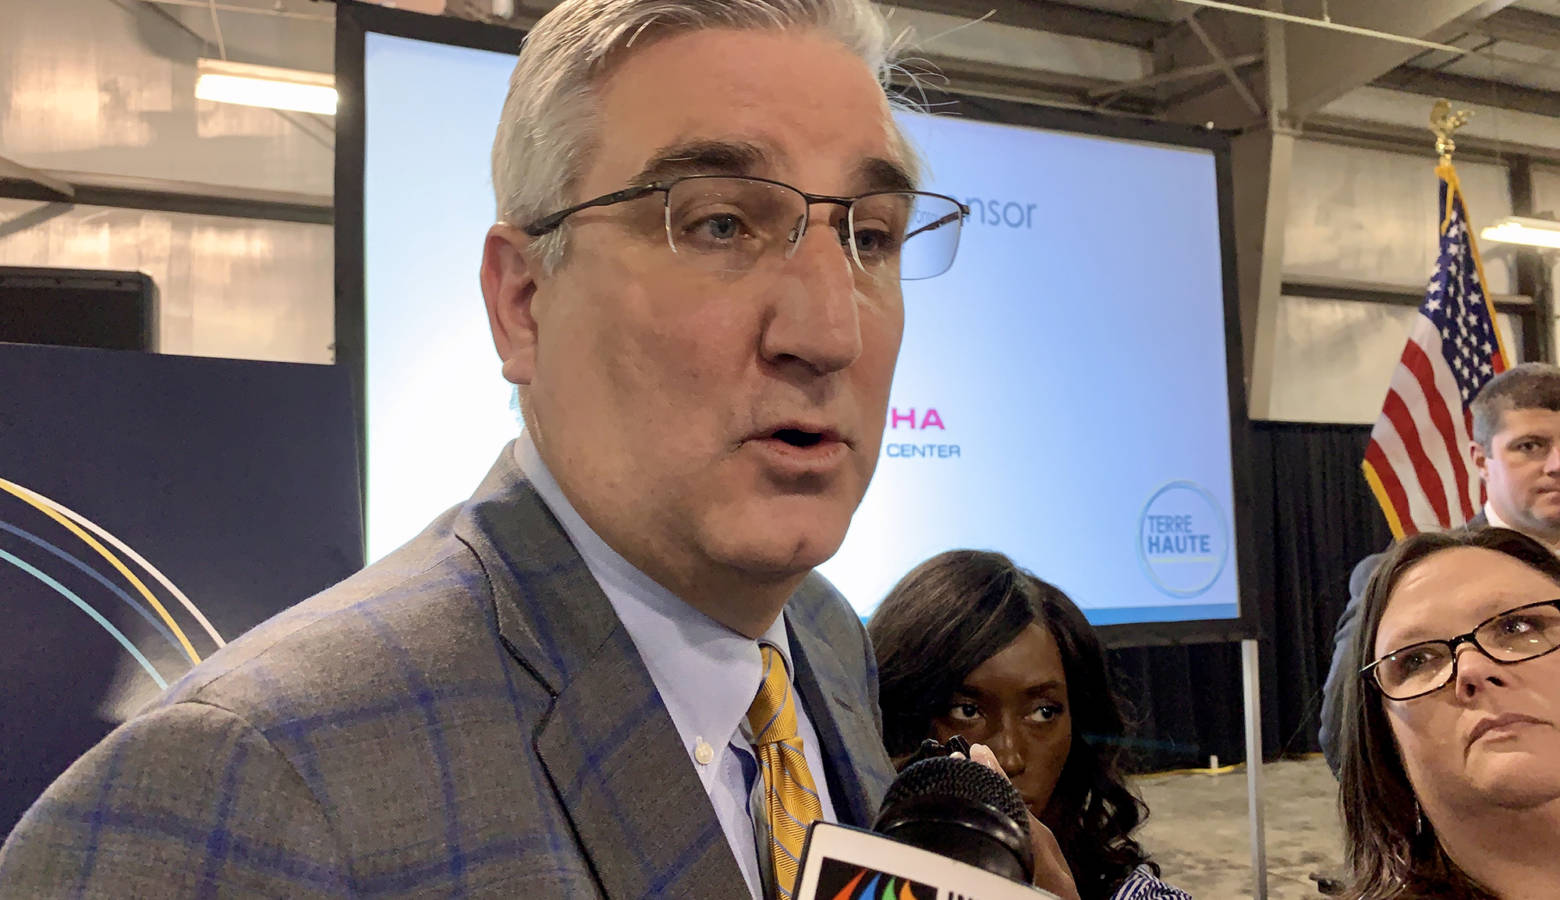 Gov. Eric Holcomb unveiled his 2020 agenda at a Terre Haute Chamber of Commerce luncheon. (Brandon Smith/IPB News)